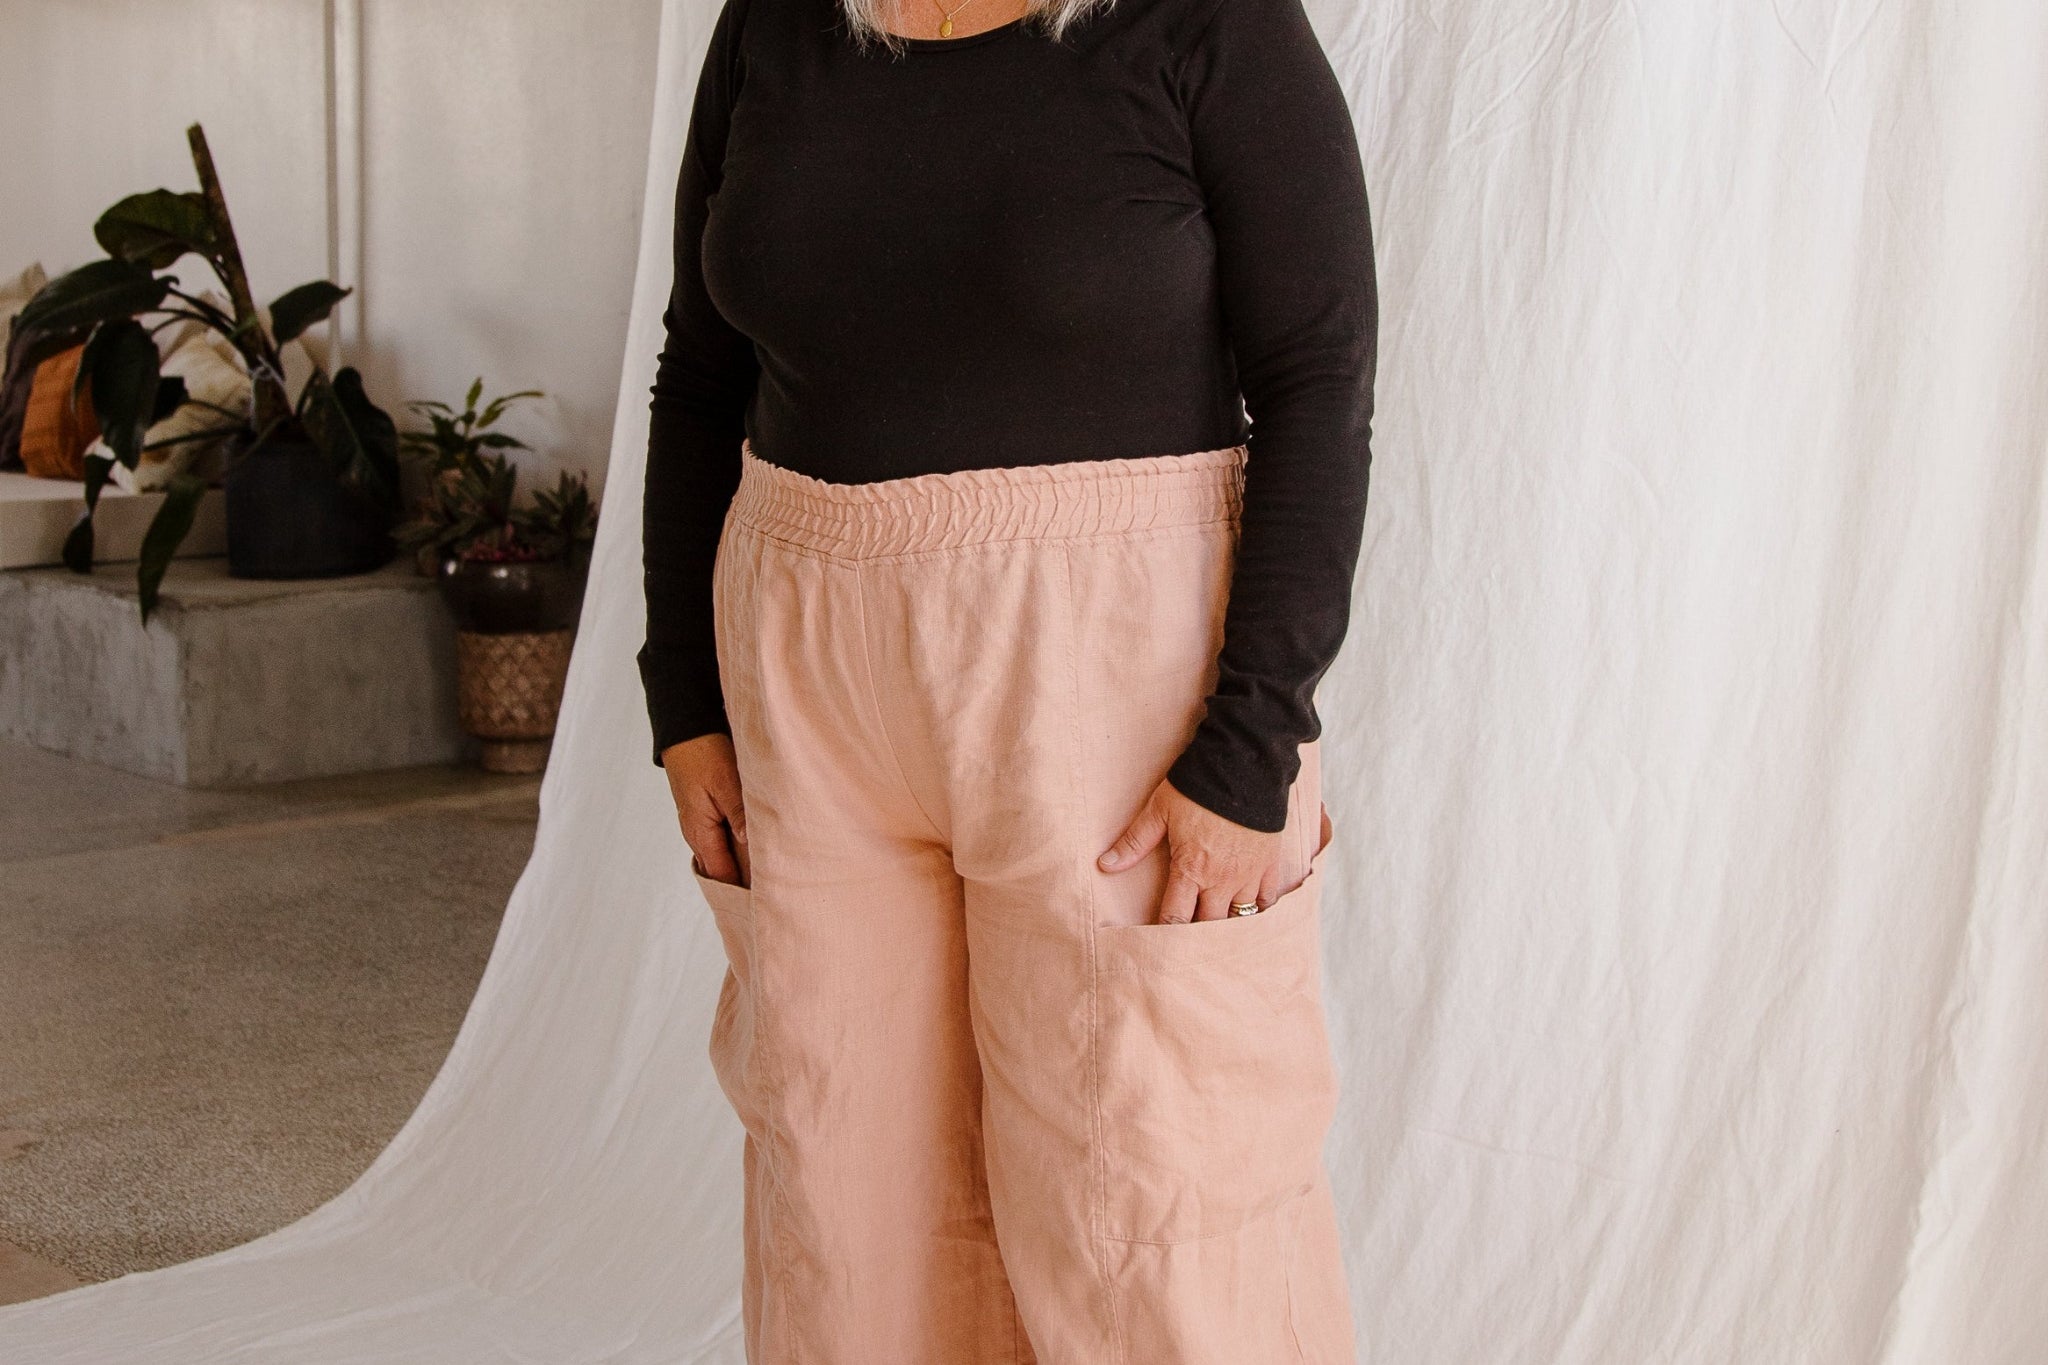 Adria Pant by Go Lightly (Linen Pant)